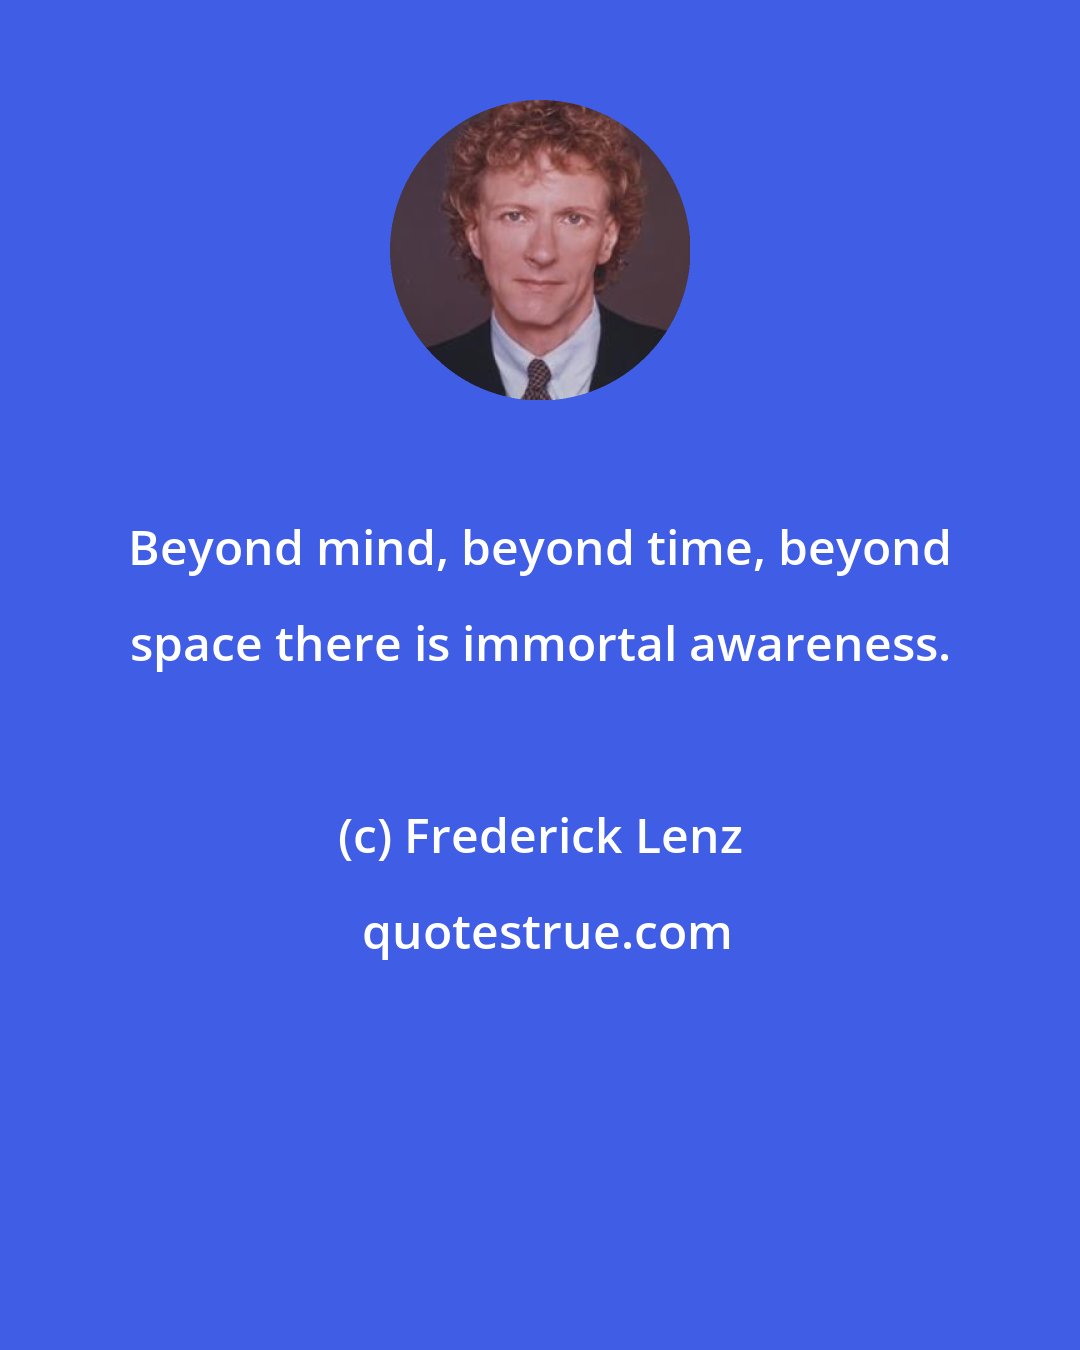 Frederick Lenz: Beyond mind, beyond time, beyond space there is immortal awareness.